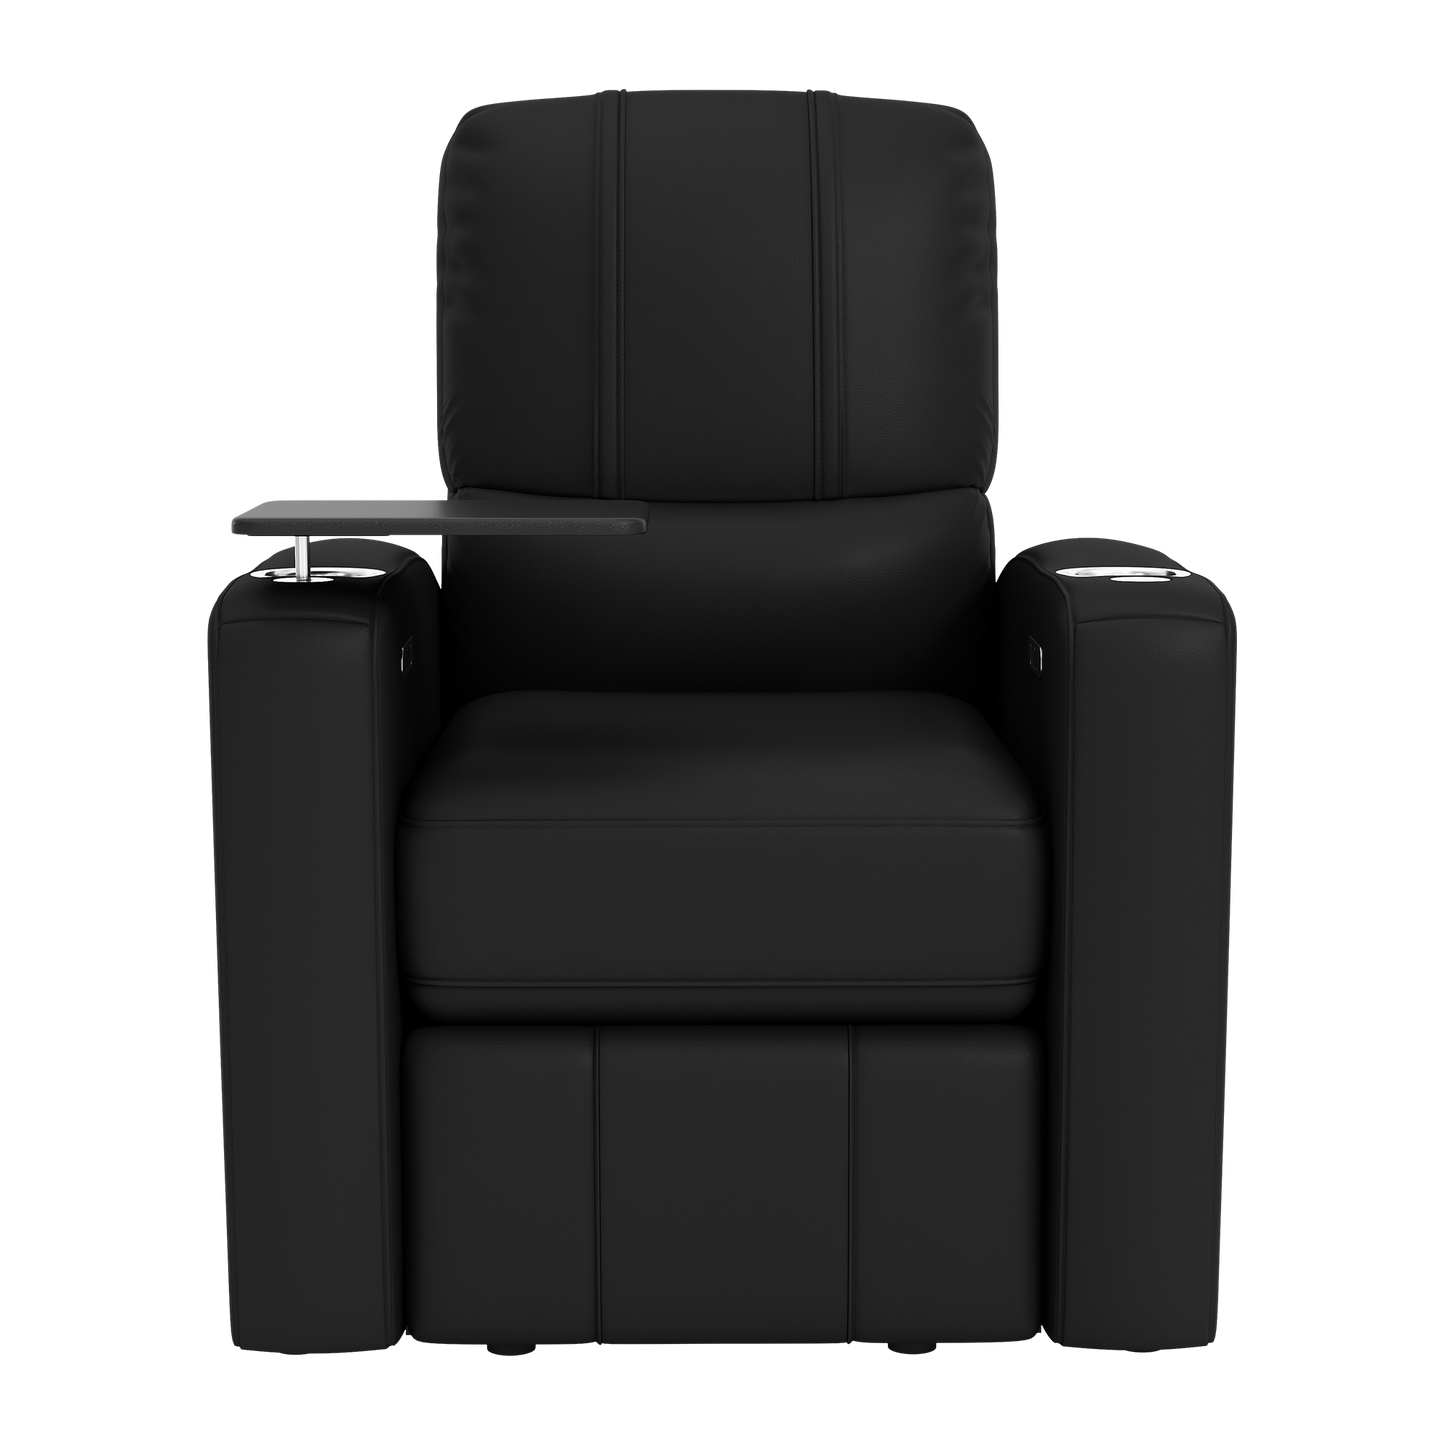 Stealth Power Plus Recliner with Vancouver Whitecaps FC Logo